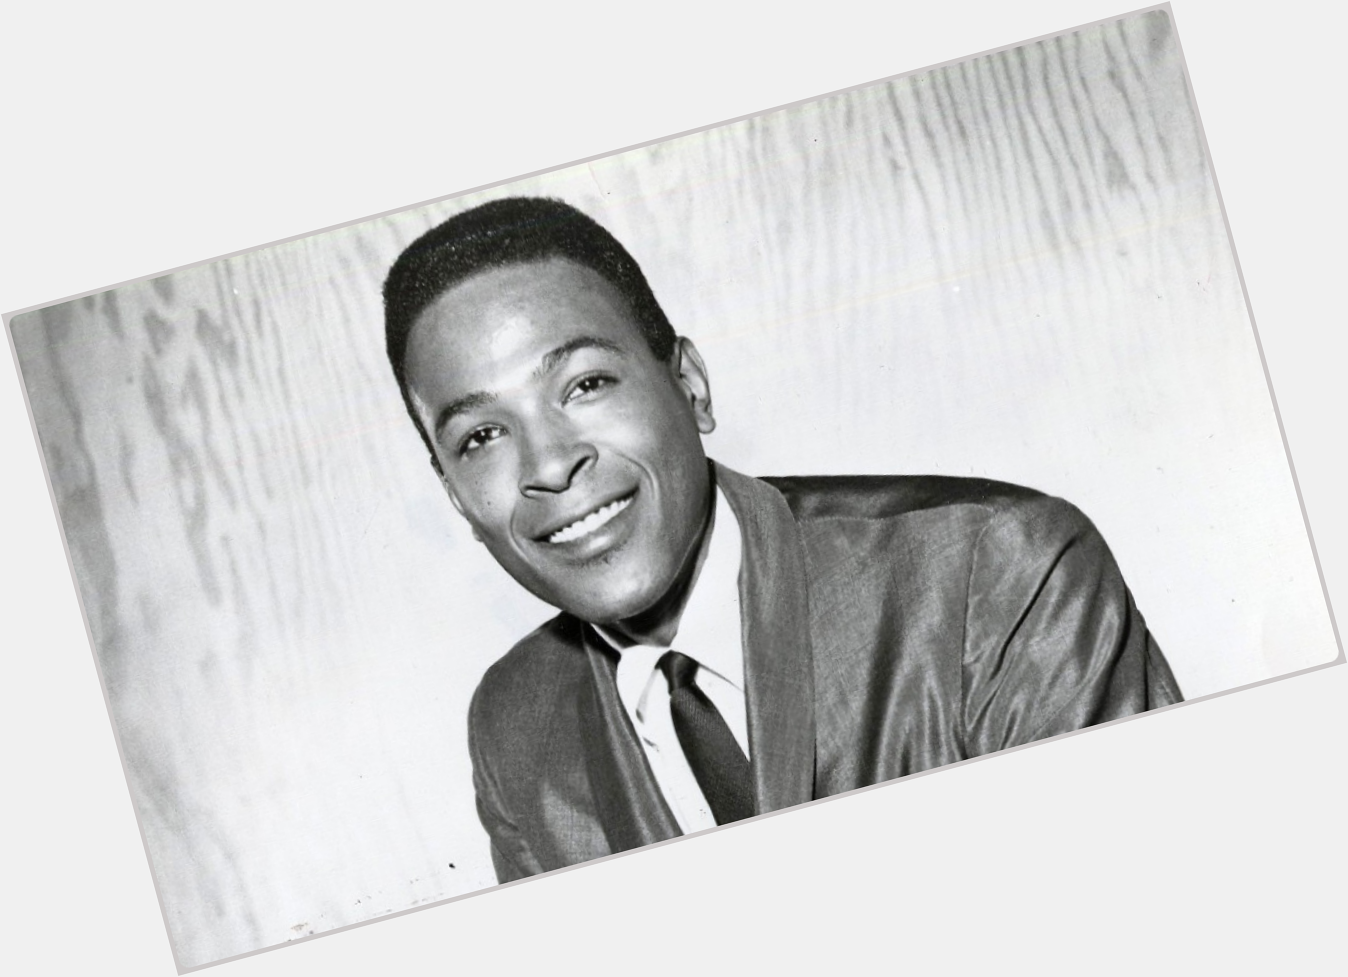 Happy birthday to the wonderful Marvin Gaye, here is a wee lyric quiz for you fans -  